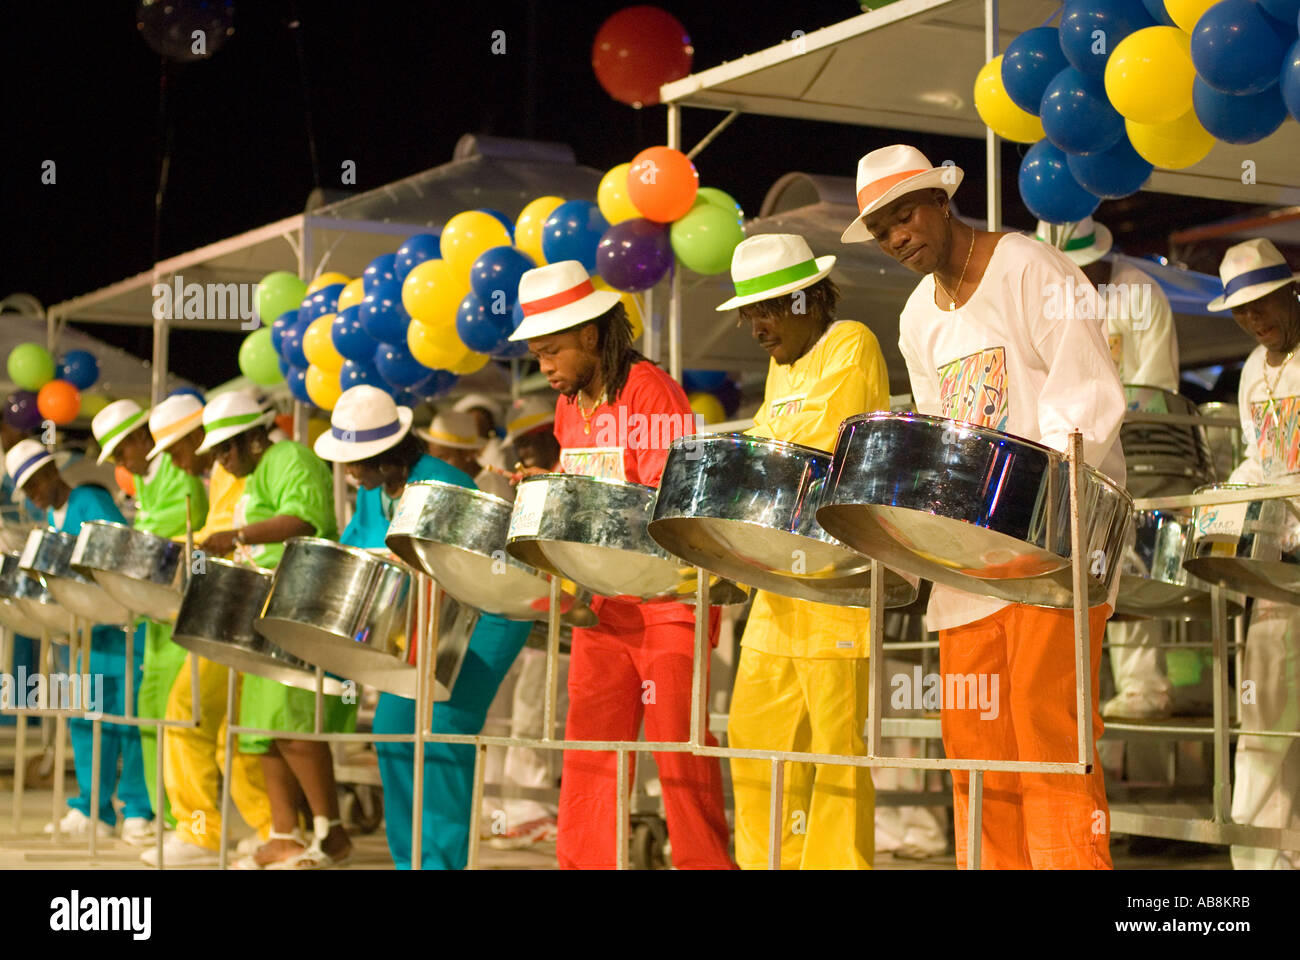 West Indies Trinidad Carnival Port of Spain Dimanche Gras Competion Steel Pan Band performing on main stage Stock Photo